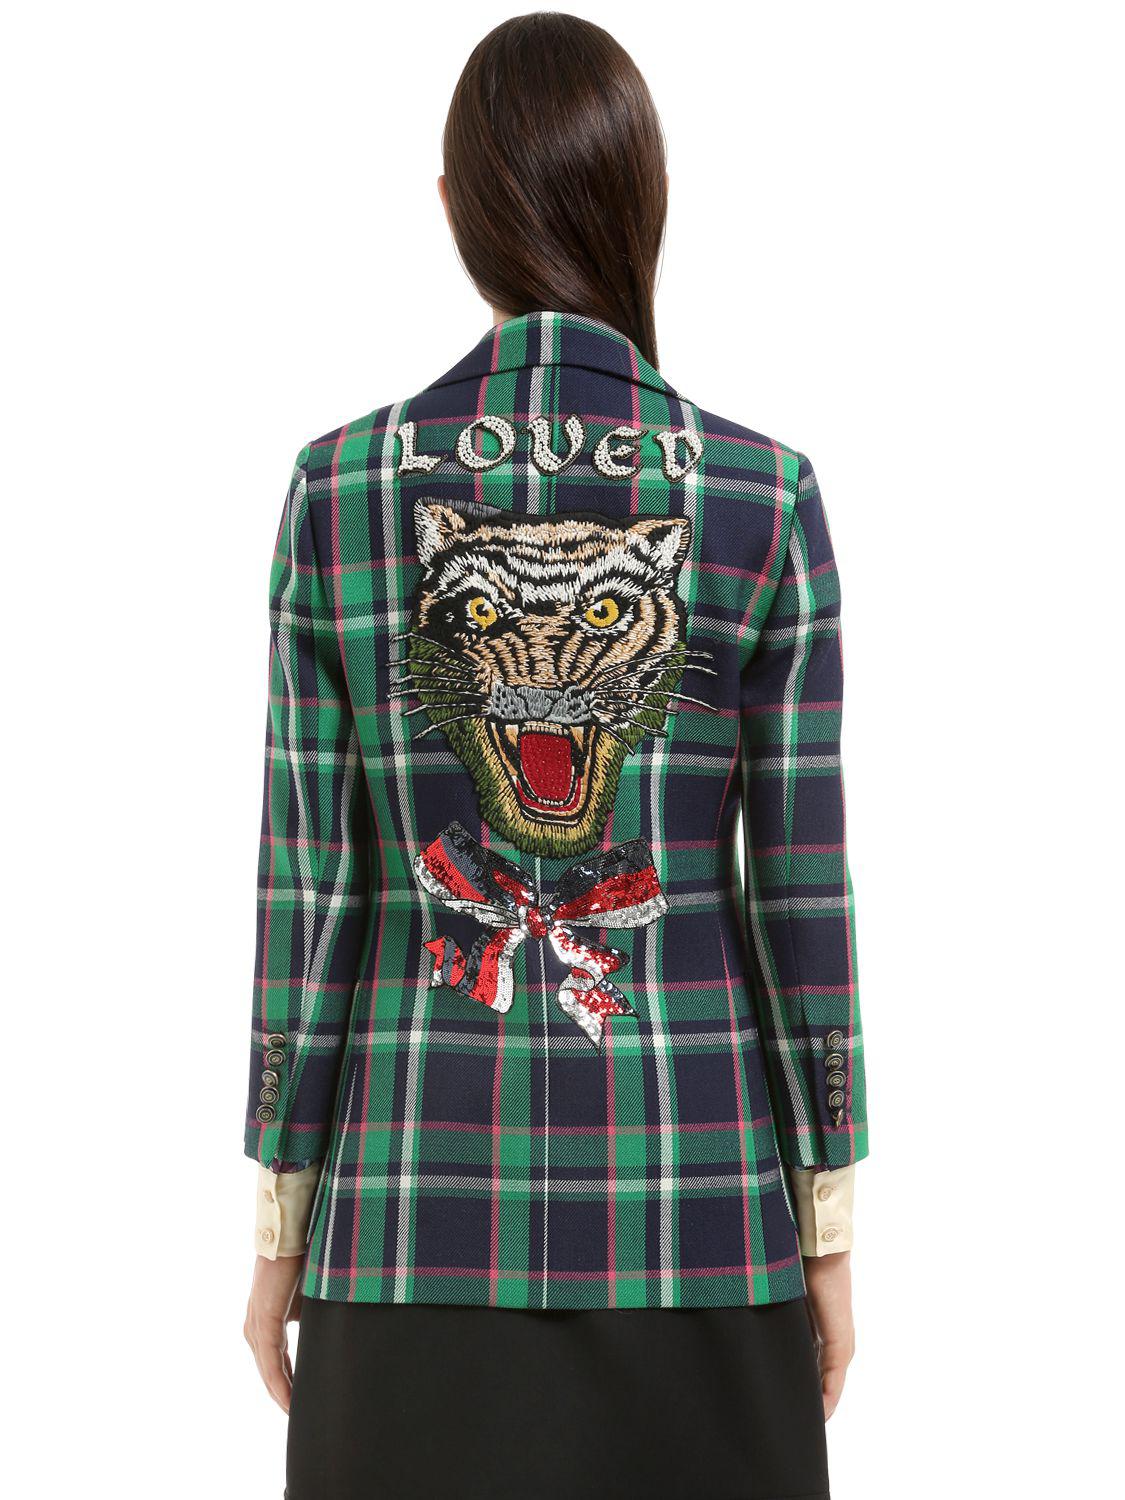 Gucci Tiger Patch Plaid Wool Jacket in Green | Lyst